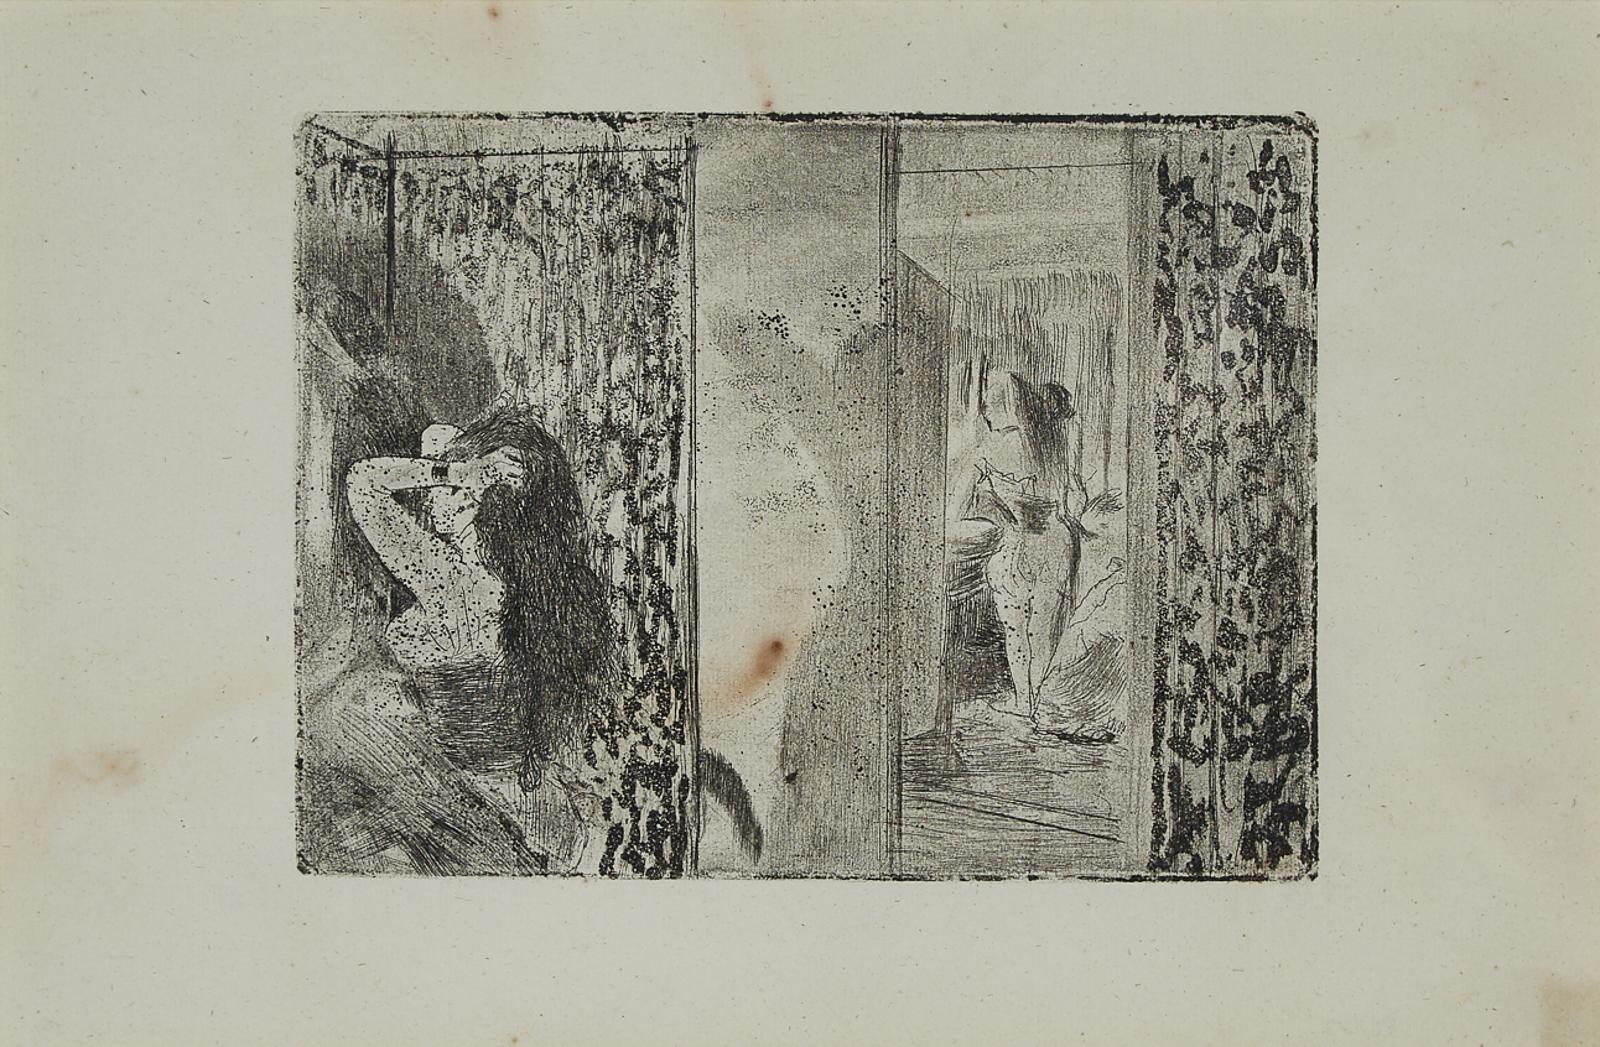 Edgar Degas (1834-1917) - Loges D'actrices (Actresses In Their Dressing Rooms), Circa 1879-1880 [delteil, 28.V; Adhemar, 31]